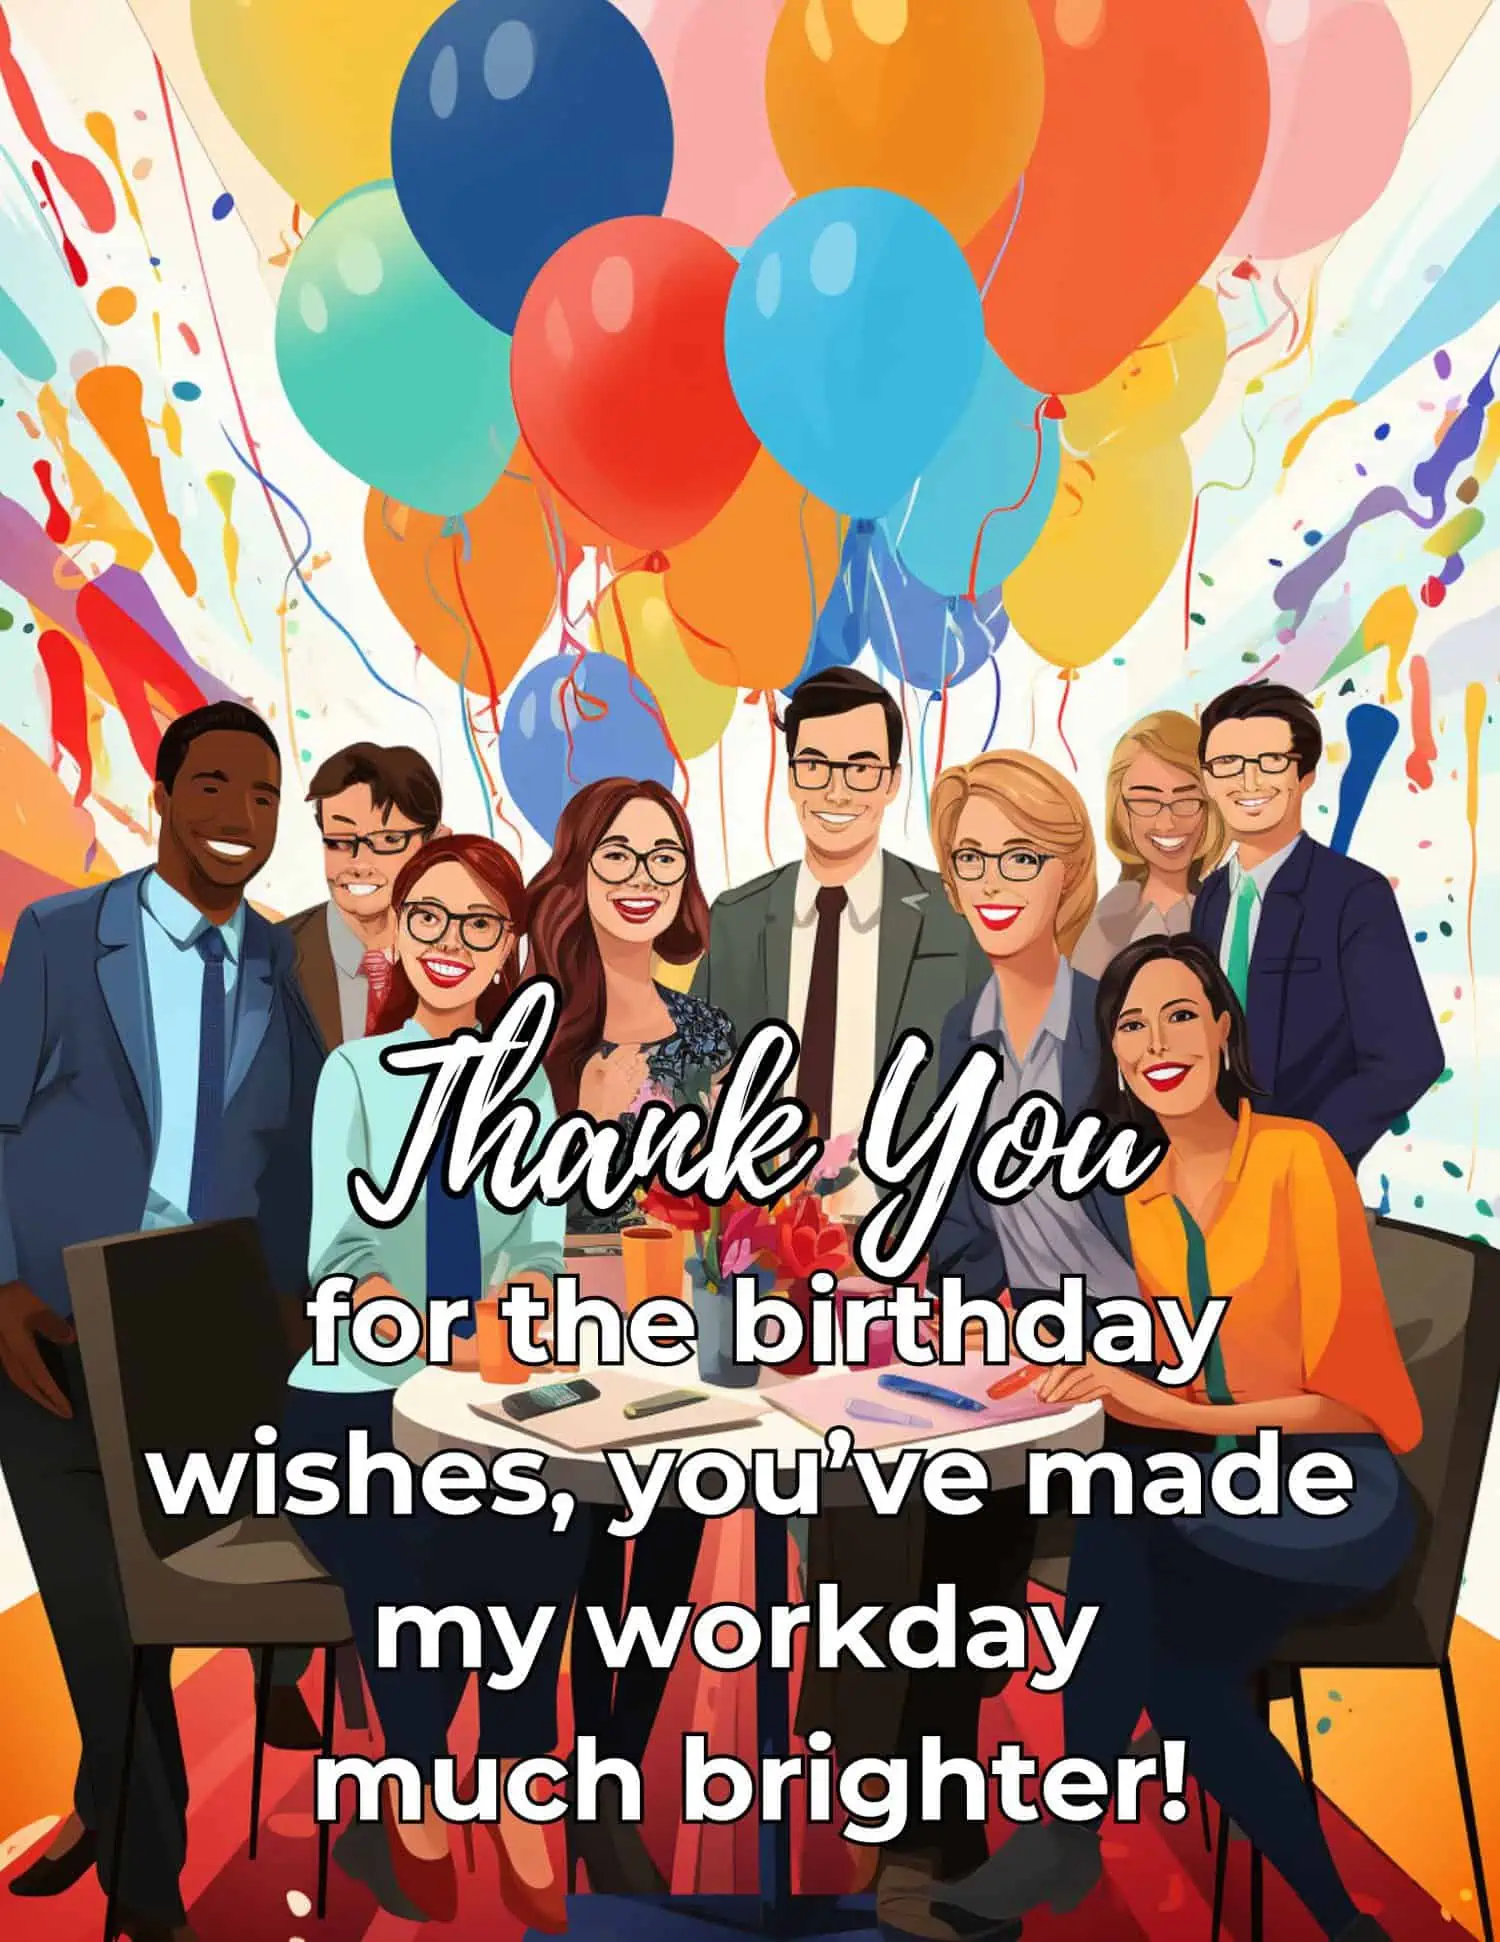 Explore professional and considerate messages to thank colleagues for birthday wishes.